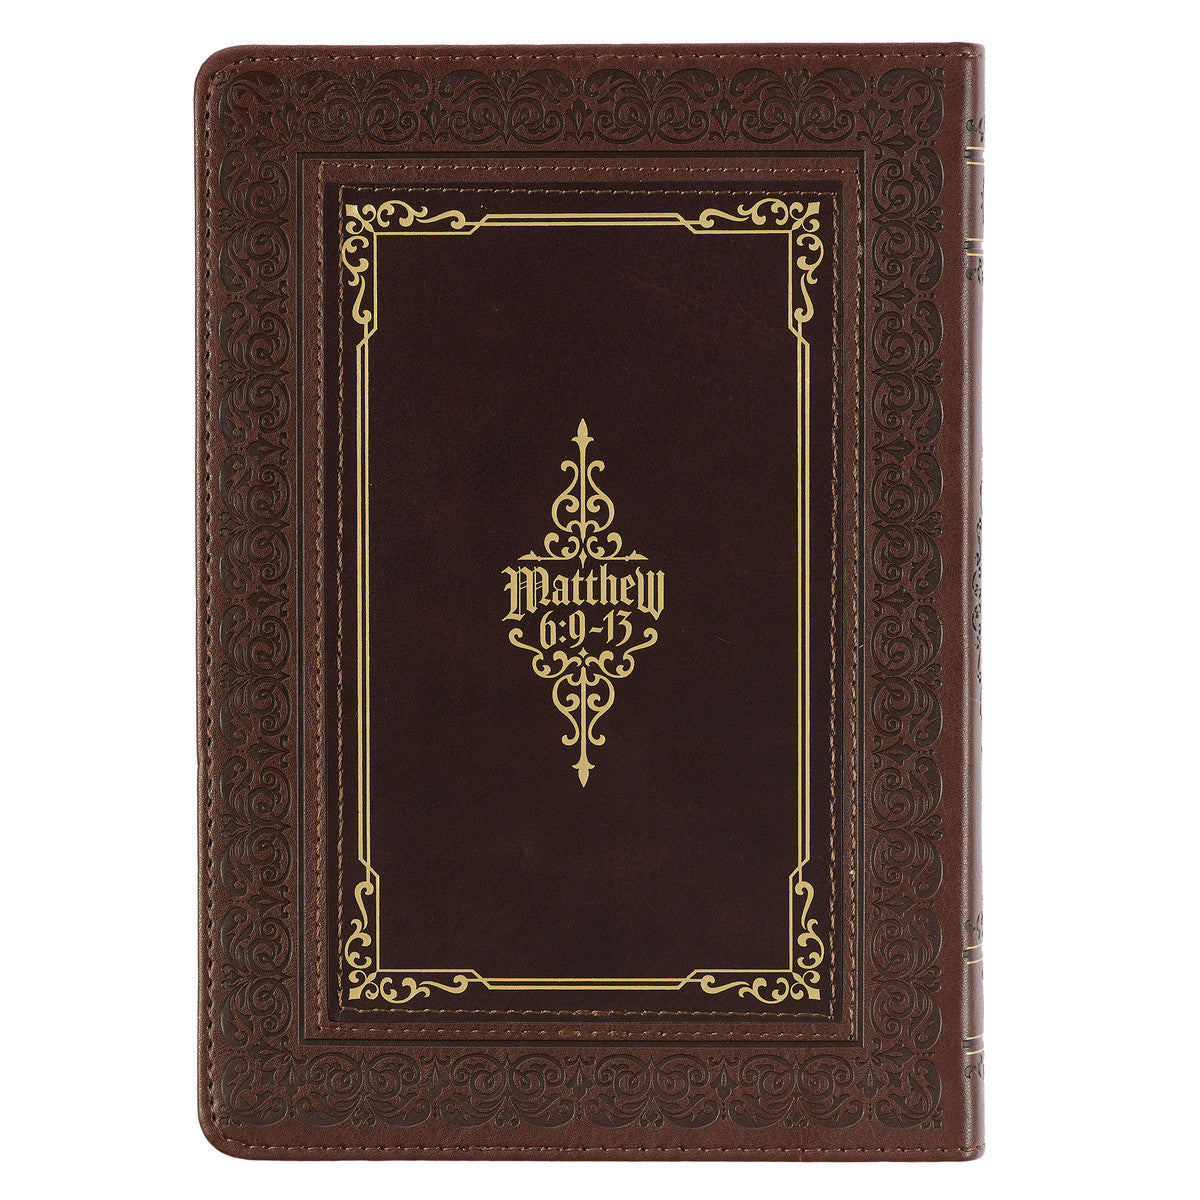 The LORD's Prayer Walnut and Burgundy Faux Leather Classic Journal - Matthew 6:9-13 - The Christian Gift Company